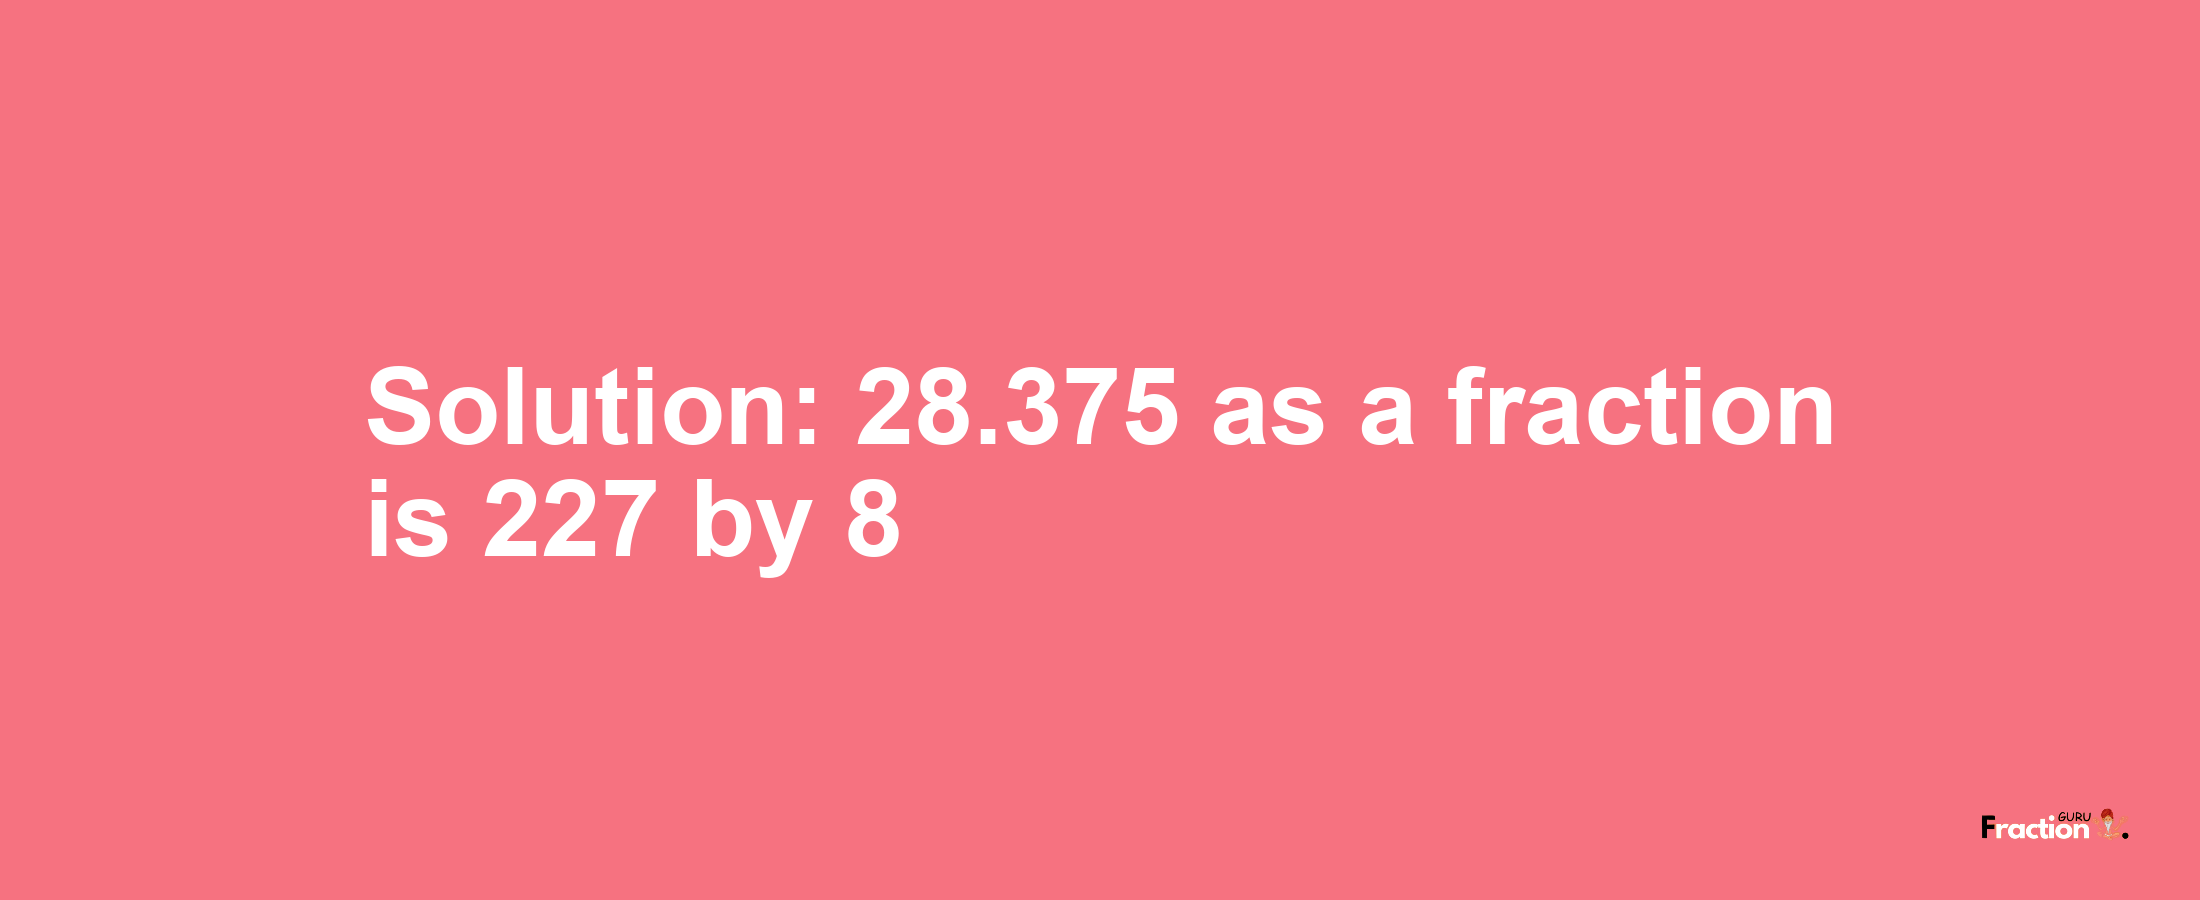 Solution:28.375 as a fraction is 227/8